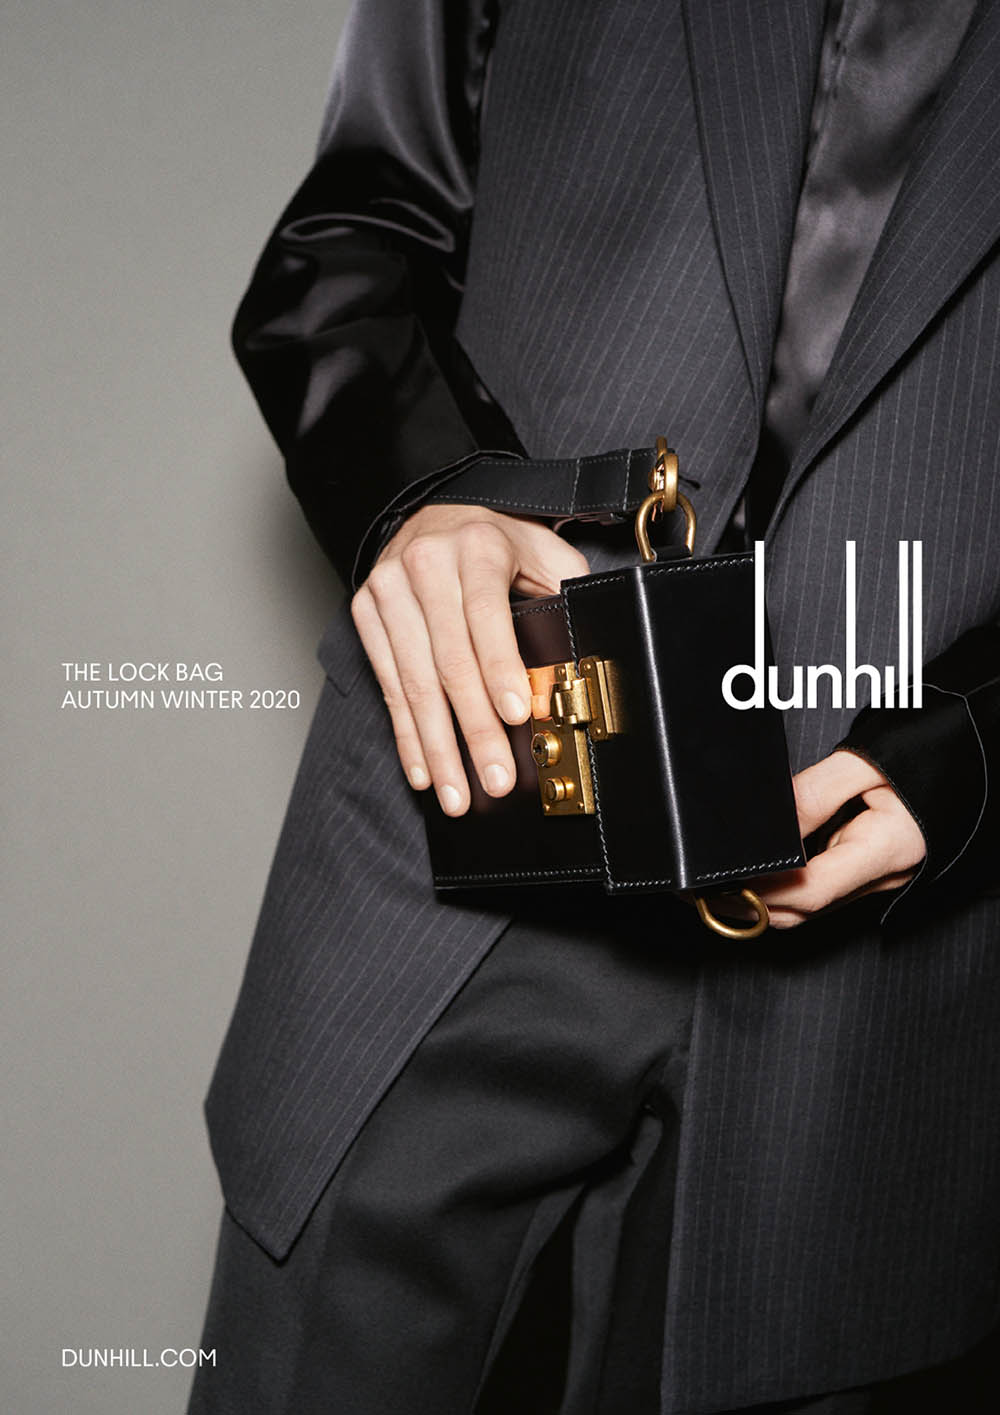 Dunhill Fall Winter 2020 Campaign